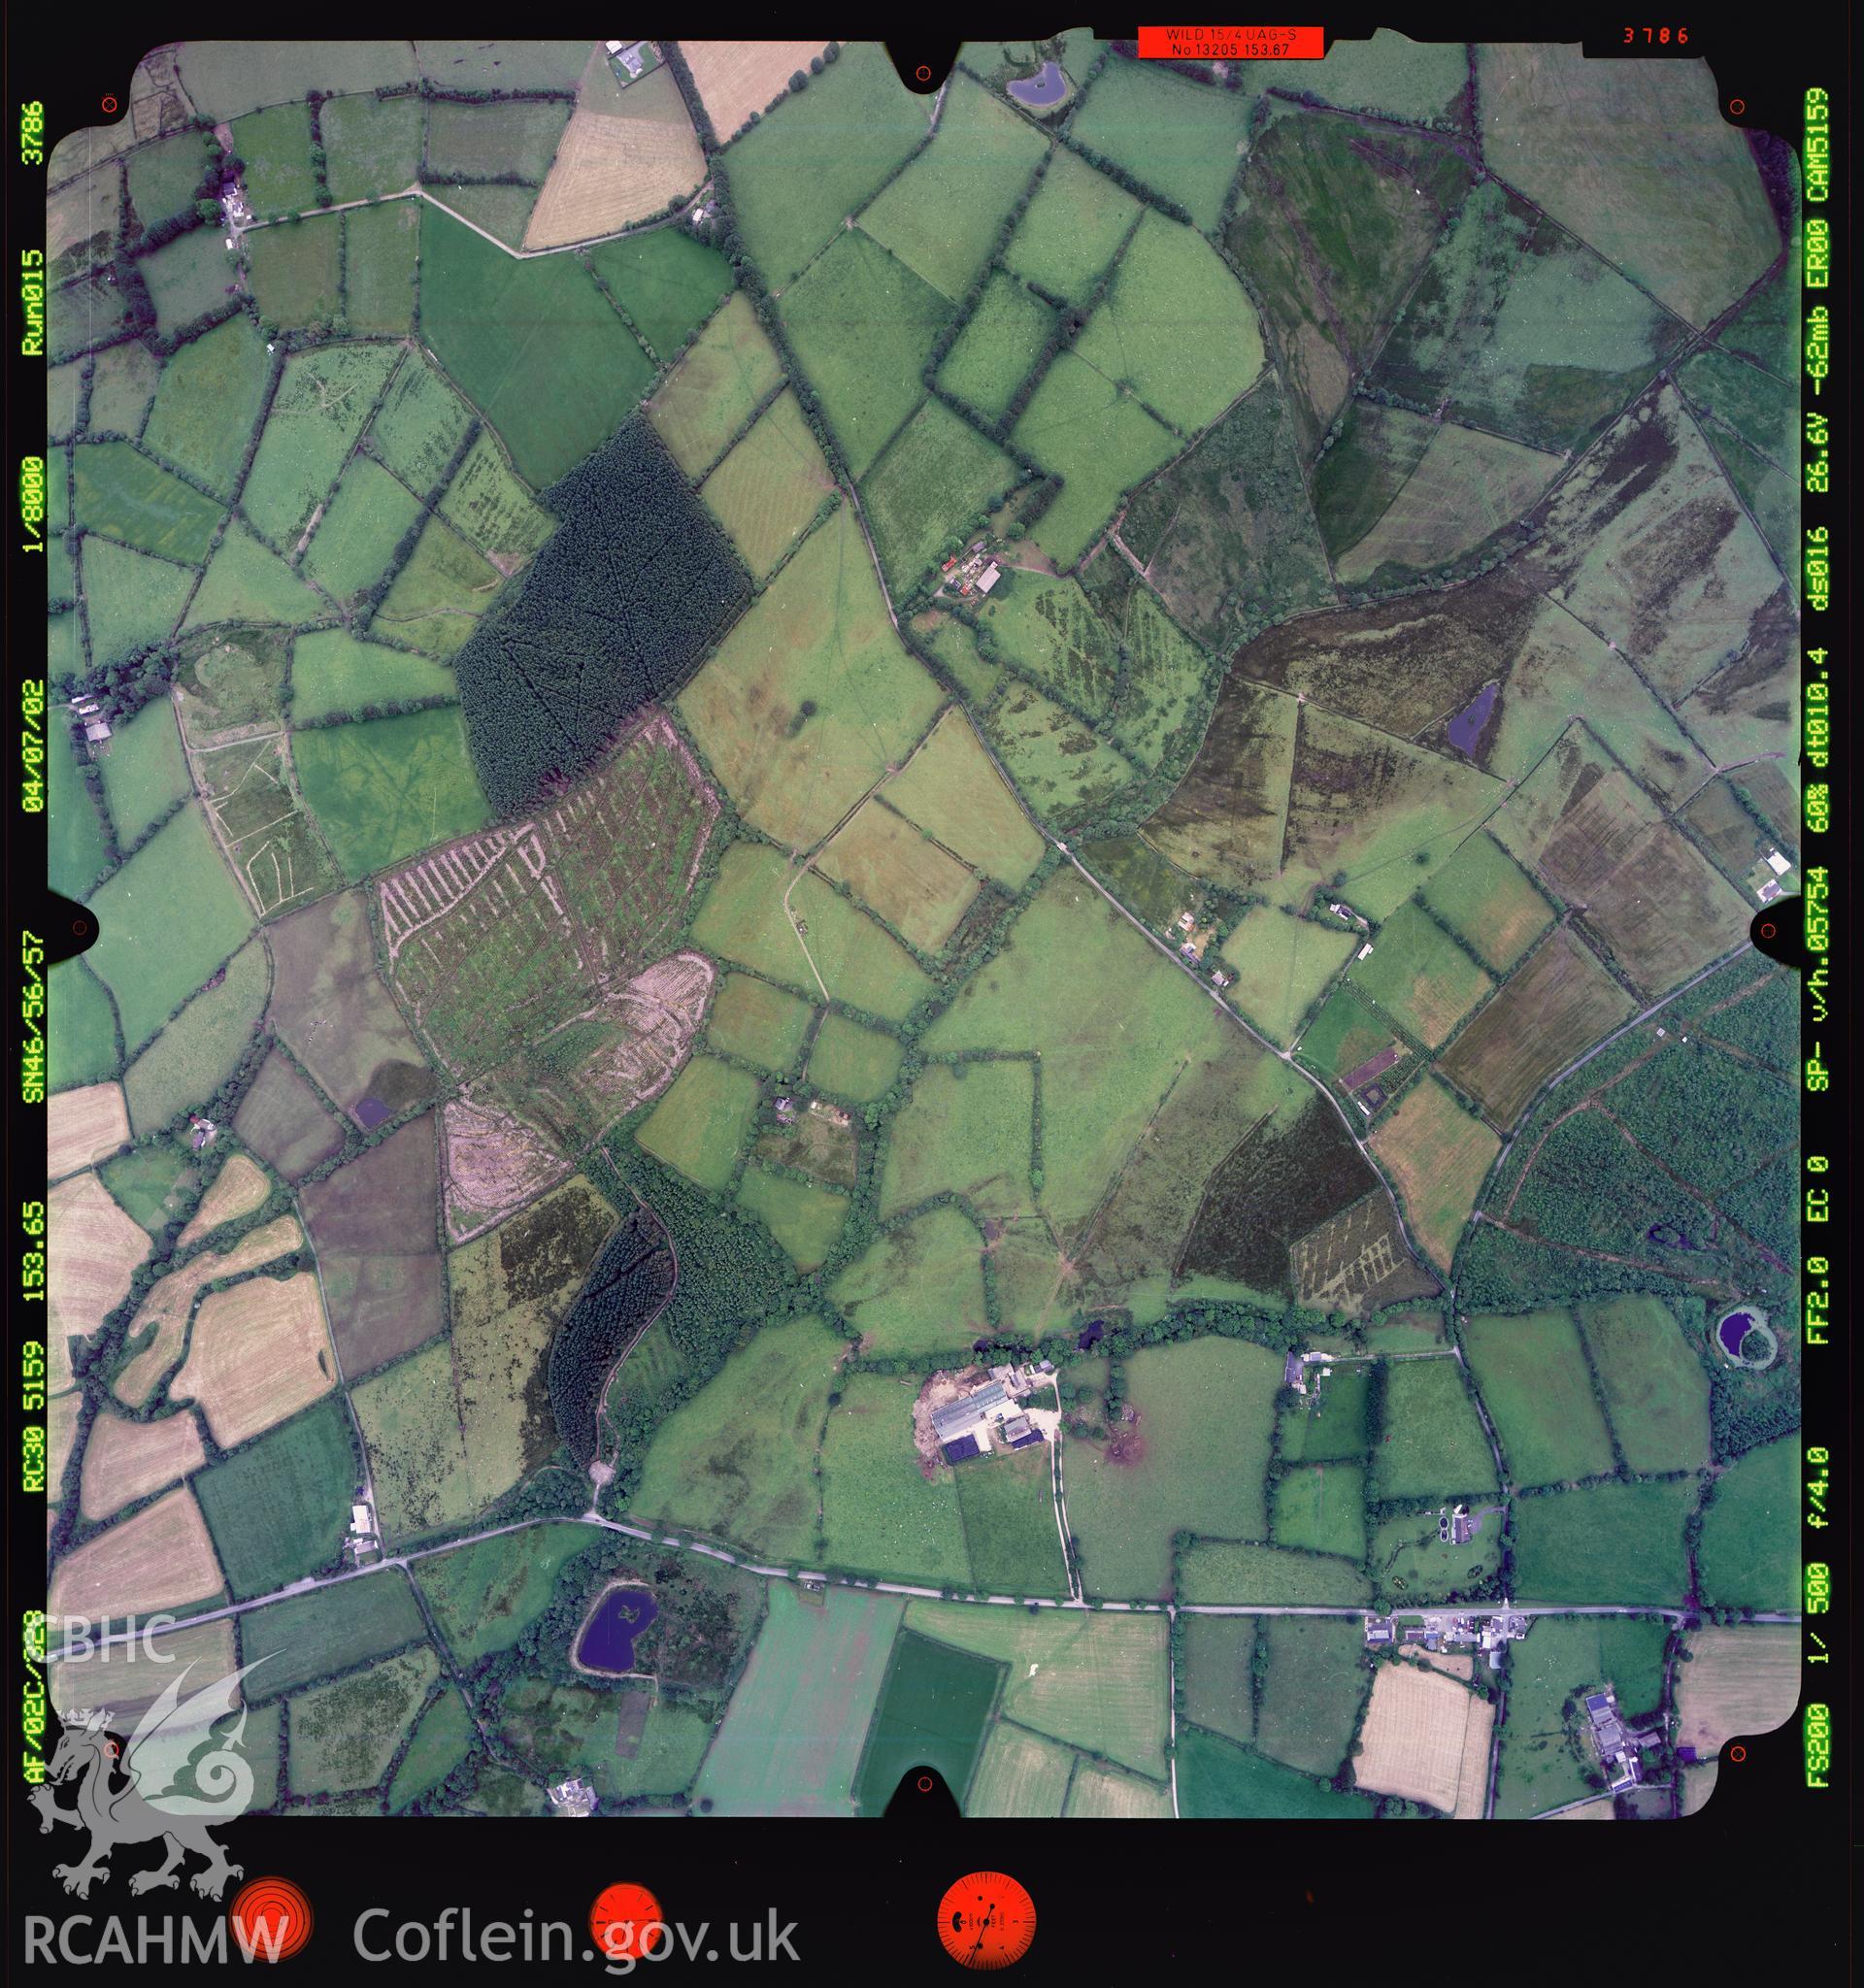 Digitized copy of a colour aerial photograph showing the Cilcennin area, taken by Ordnance Survey, 2002.